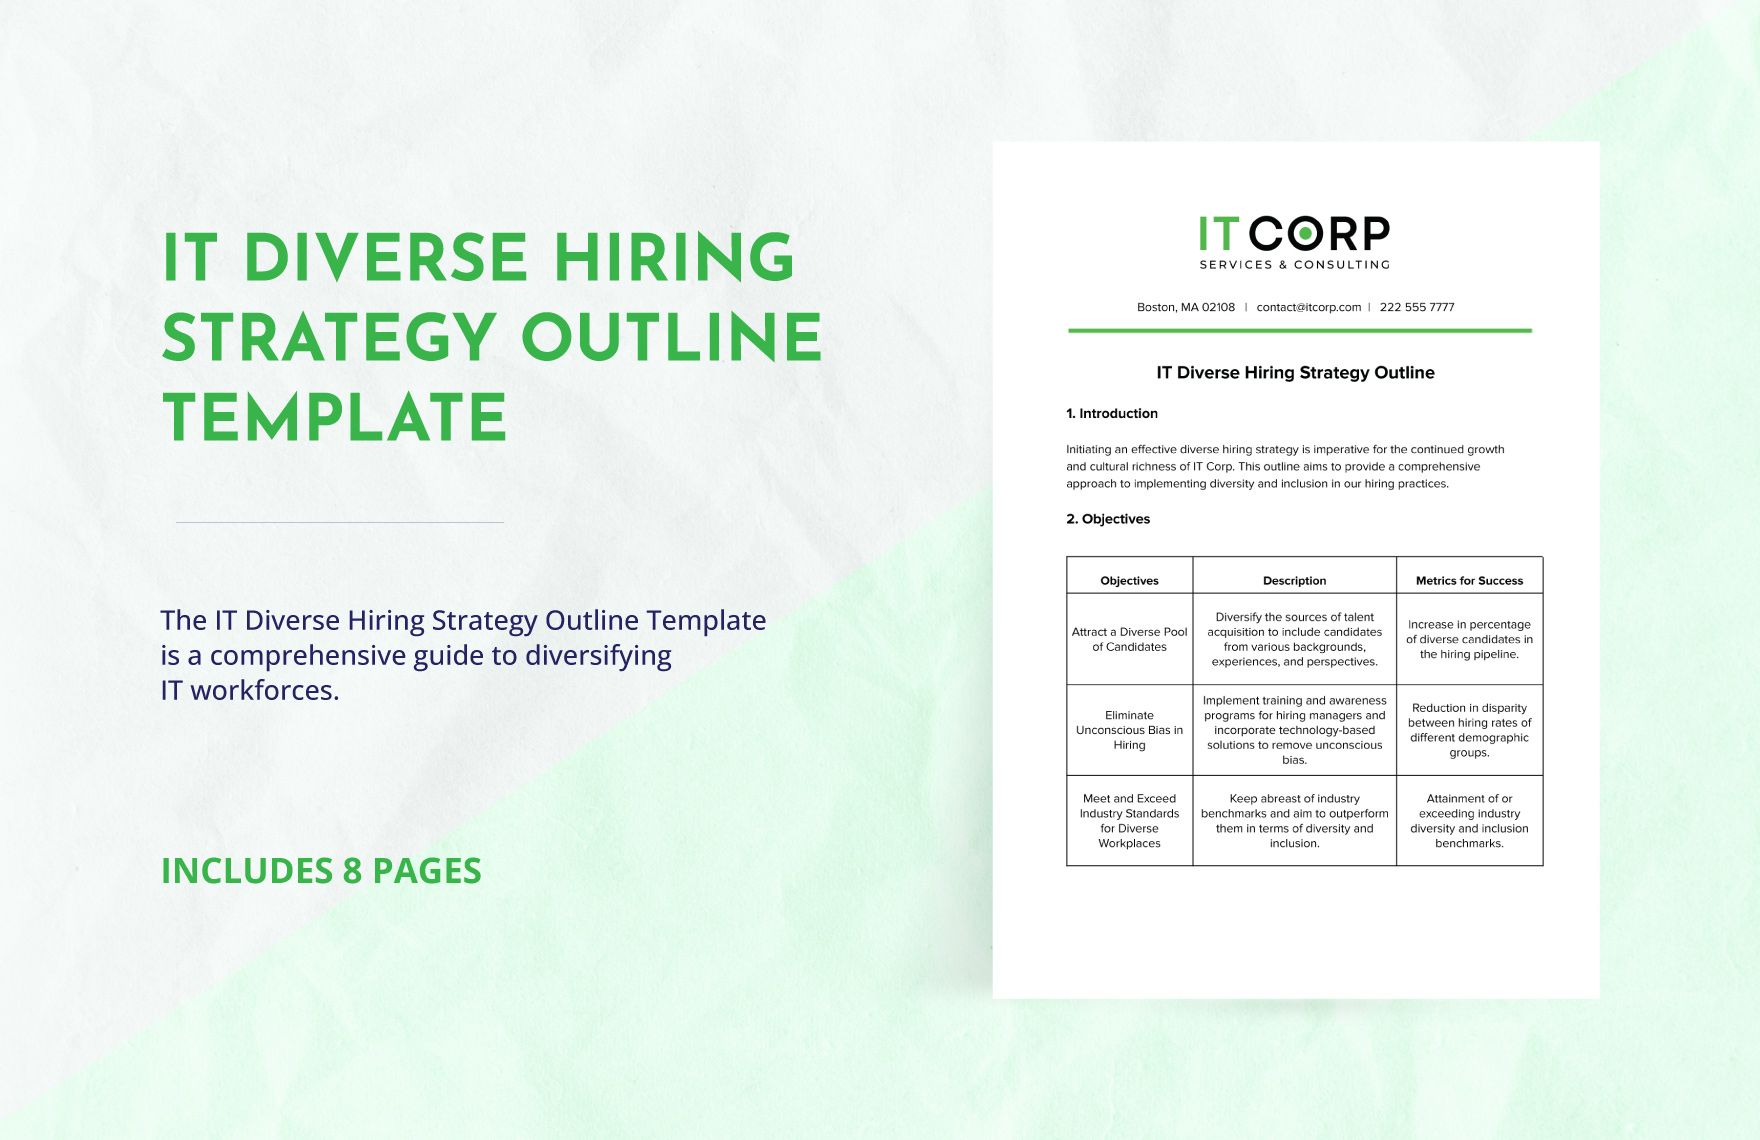 IT Diverse Hiring Strategy Outline Template